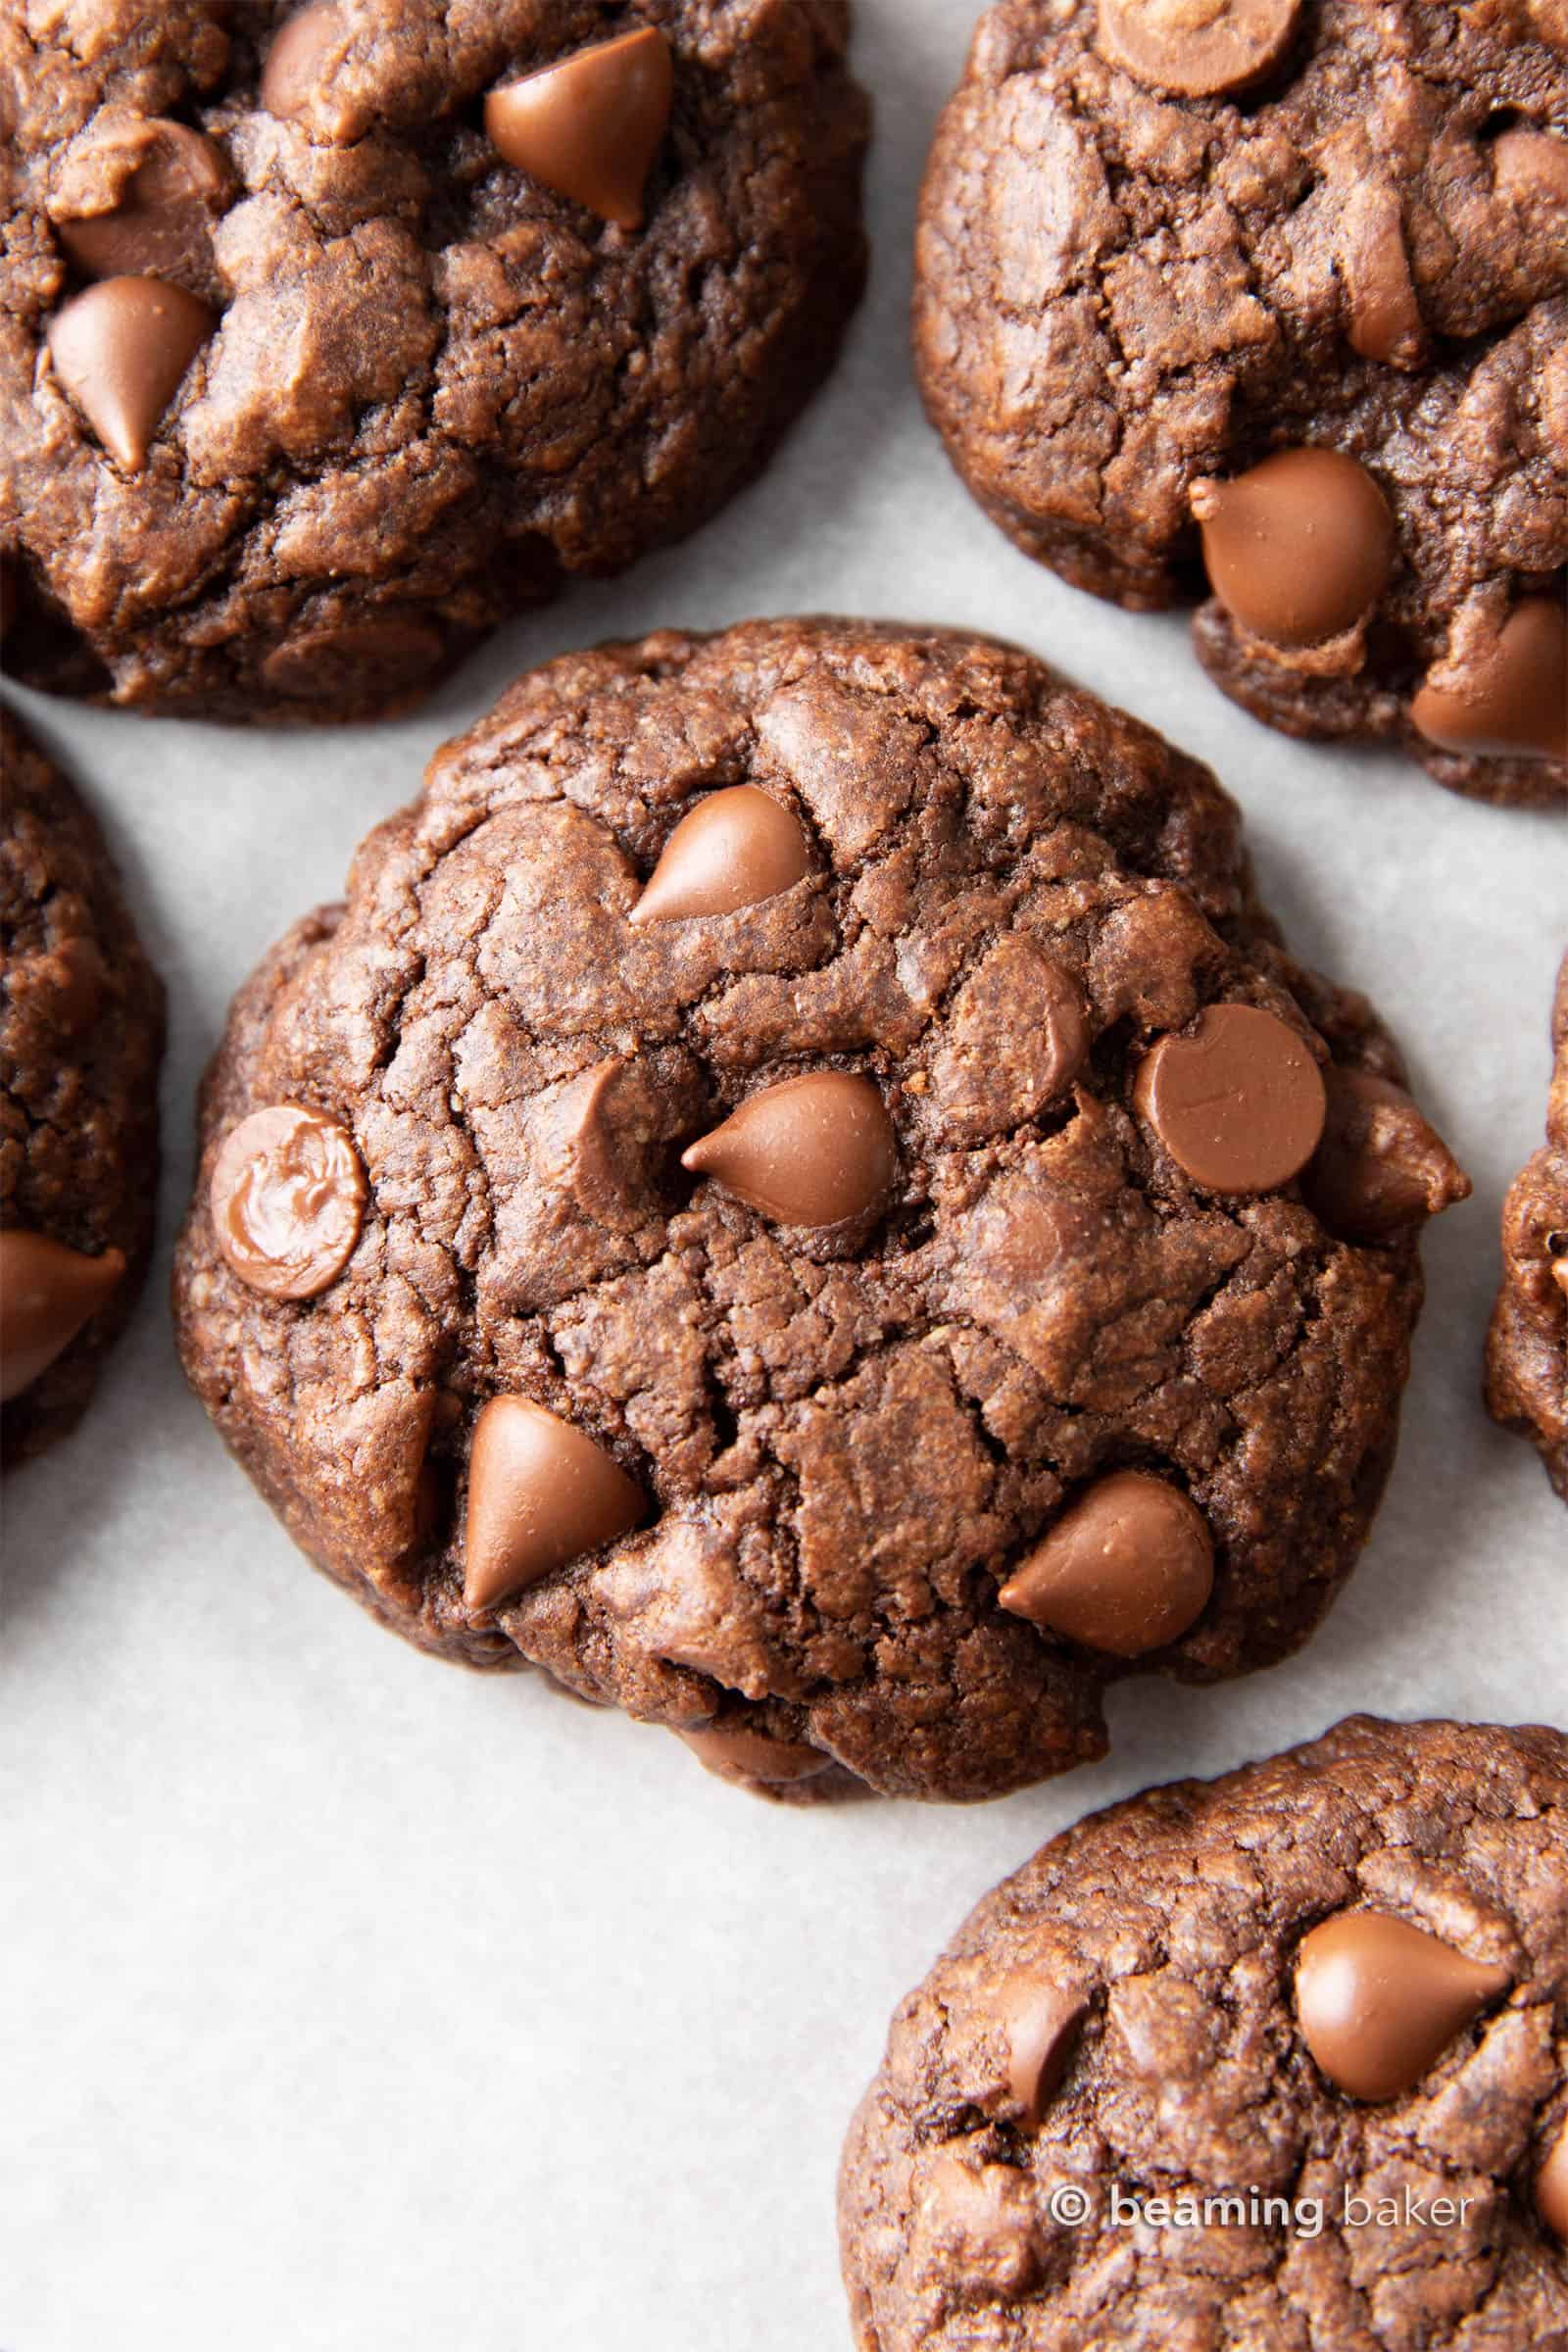 Gluten Free Chocolate Cookies: chewy & moist gluten free brownie cookies with a crispy exterior and LOTS of chocolate packed in! The BEST gluten free chocolate brownie cookie recipe EVER. #Brownies #GlutenFree #Cookies #Vegan | Recipe at BeamingBaker.com